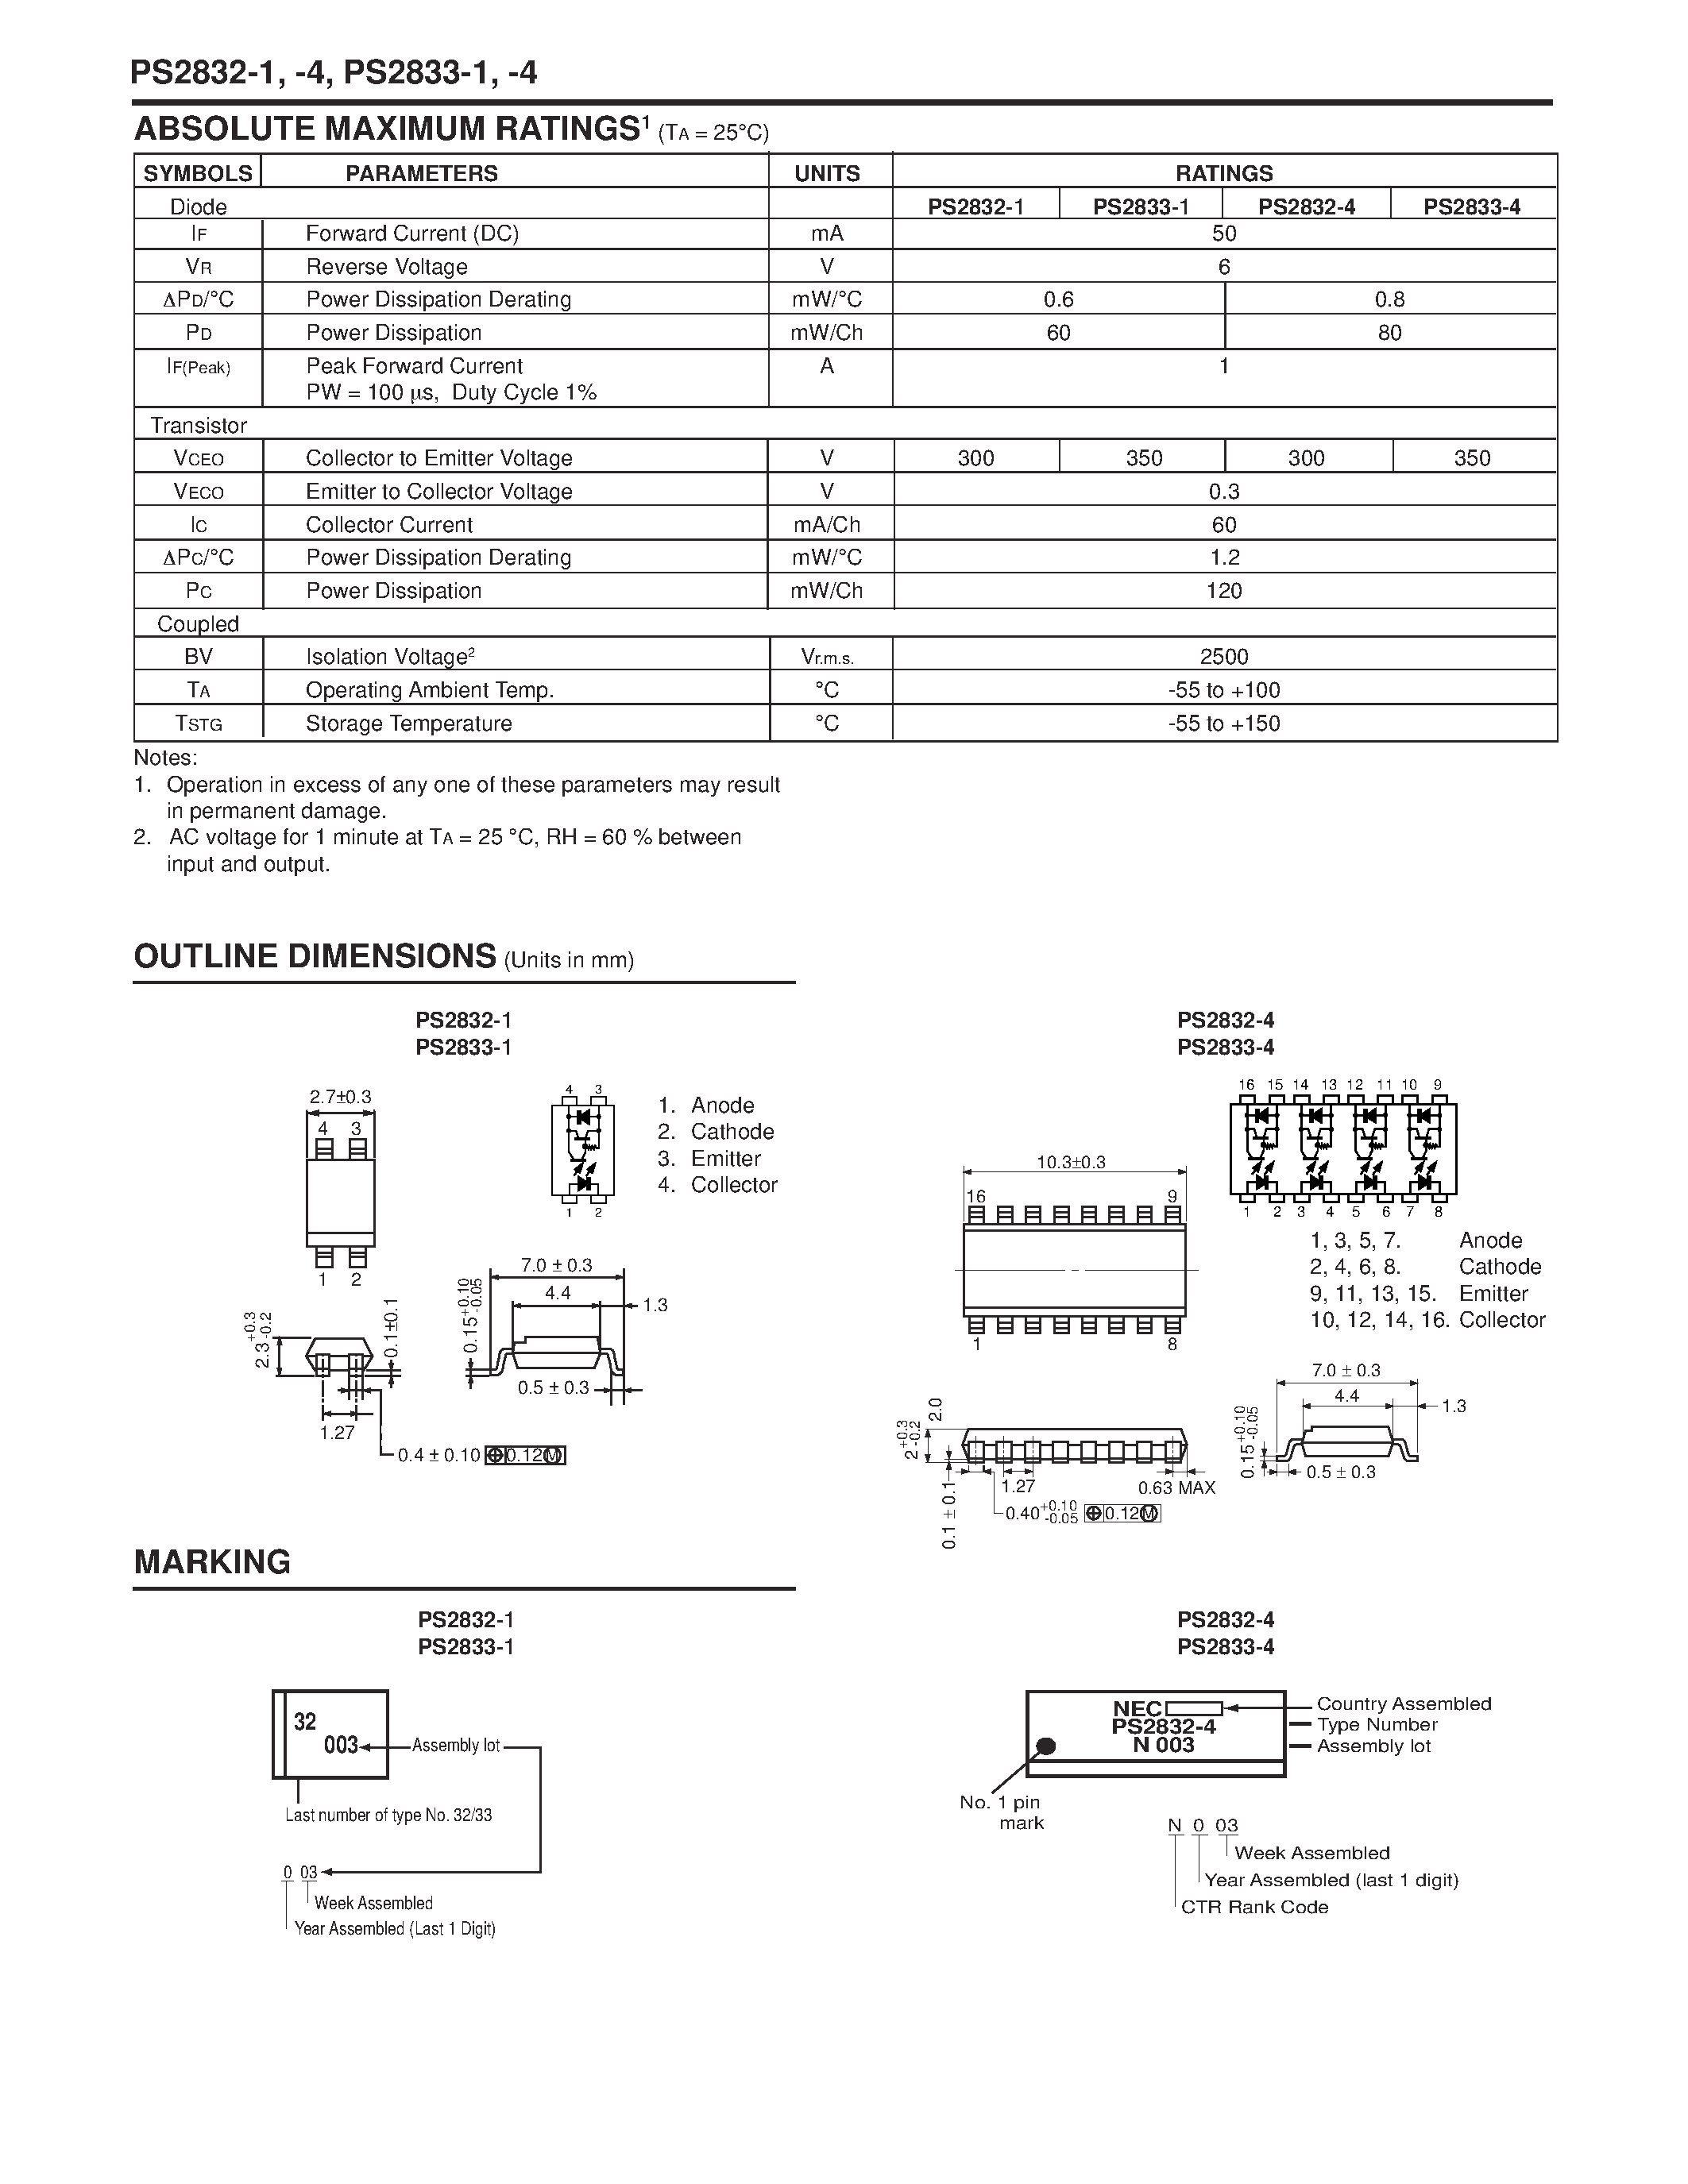 Datasheet PS2832-4-V-F3 - HIGH ISOLATION VOLTAGE HIGH COLLECTOR TO EMITTER VOLTAGE SOP MULTI OPTOCOUPLER page 2